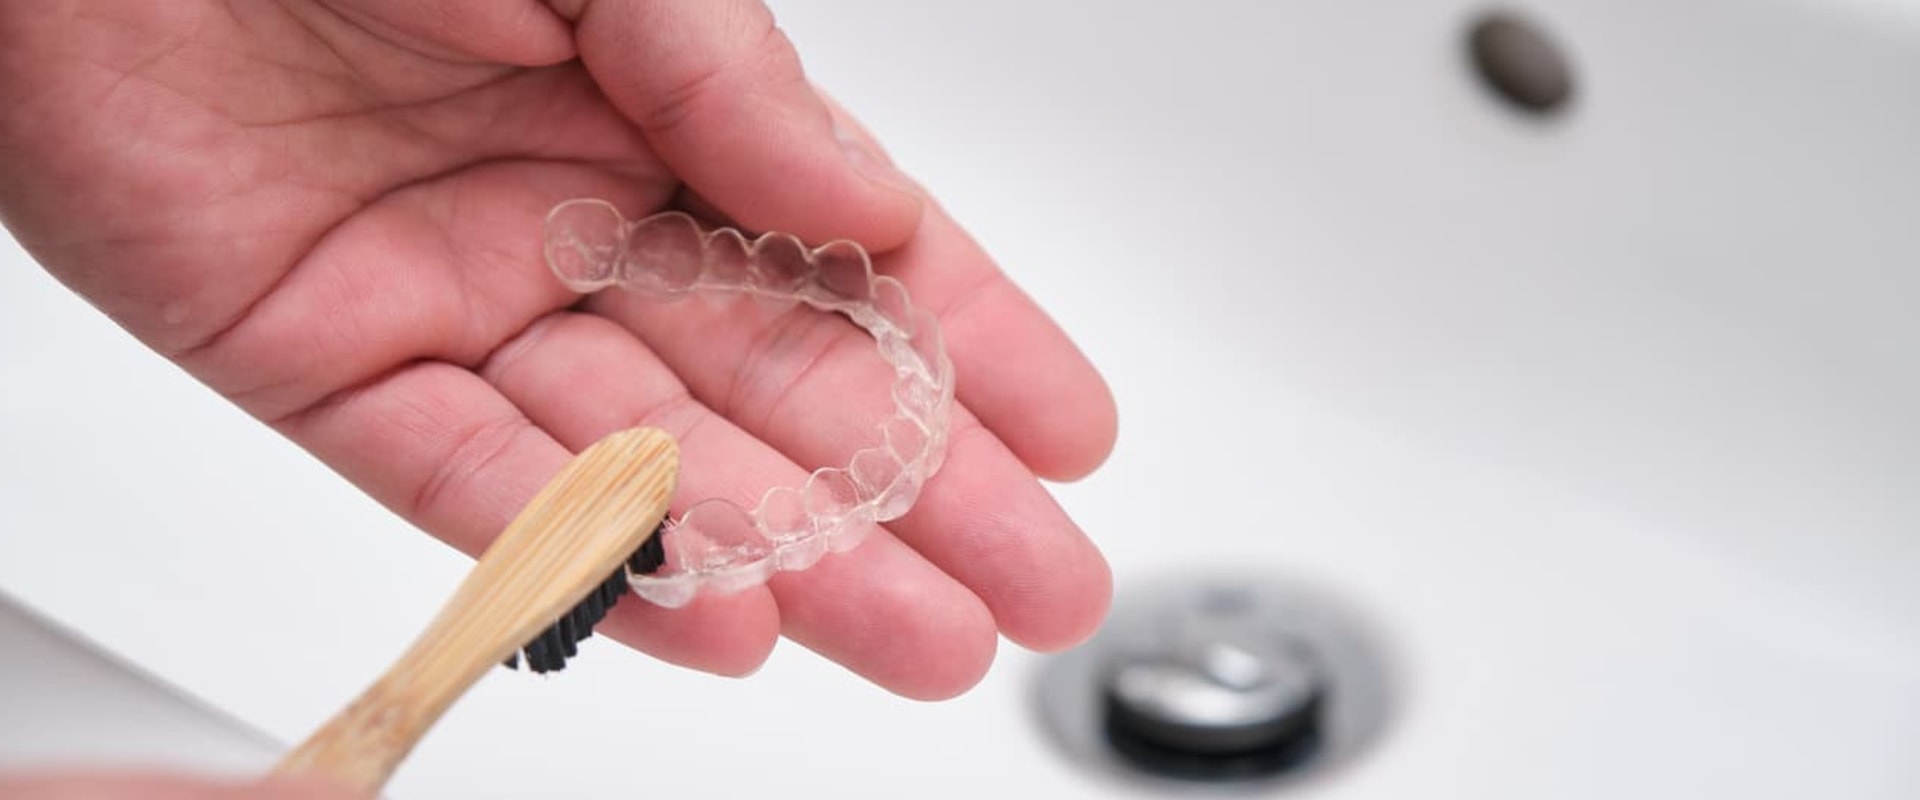 Cleaning and Caring for Your Aligners